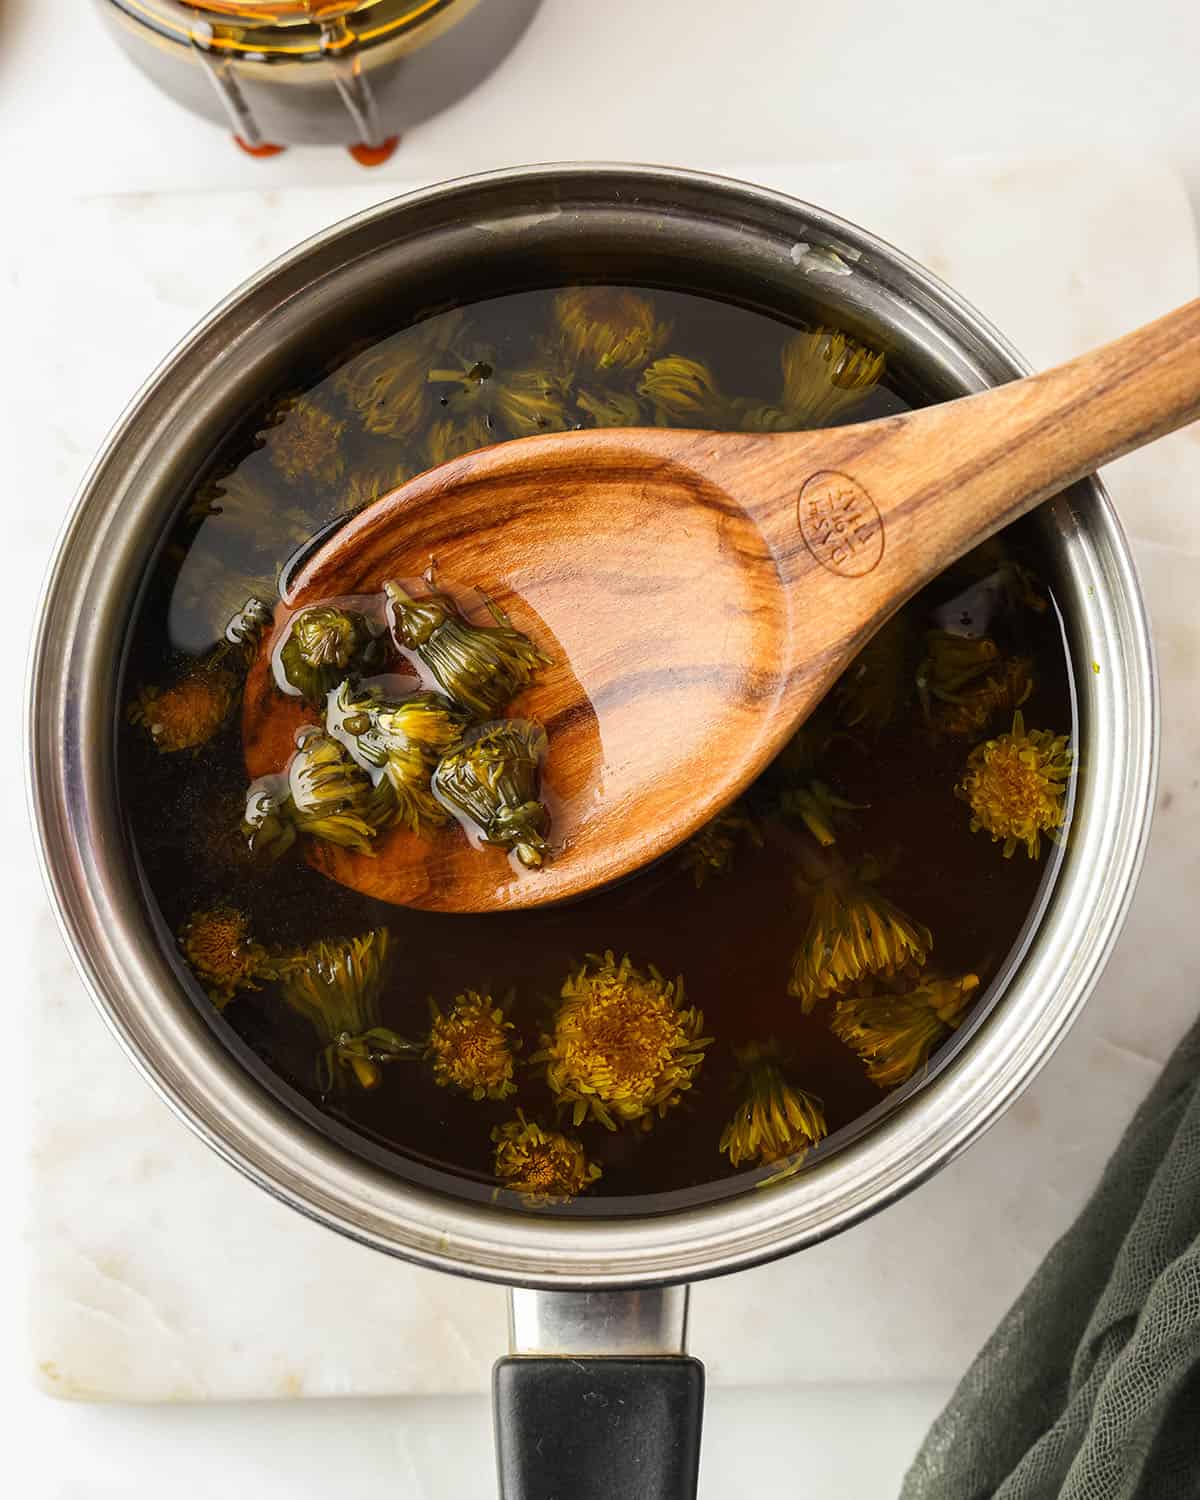 Dandelions steeping in hot water in a pot for tea with a wooden spoon lifting the blossoms out. 